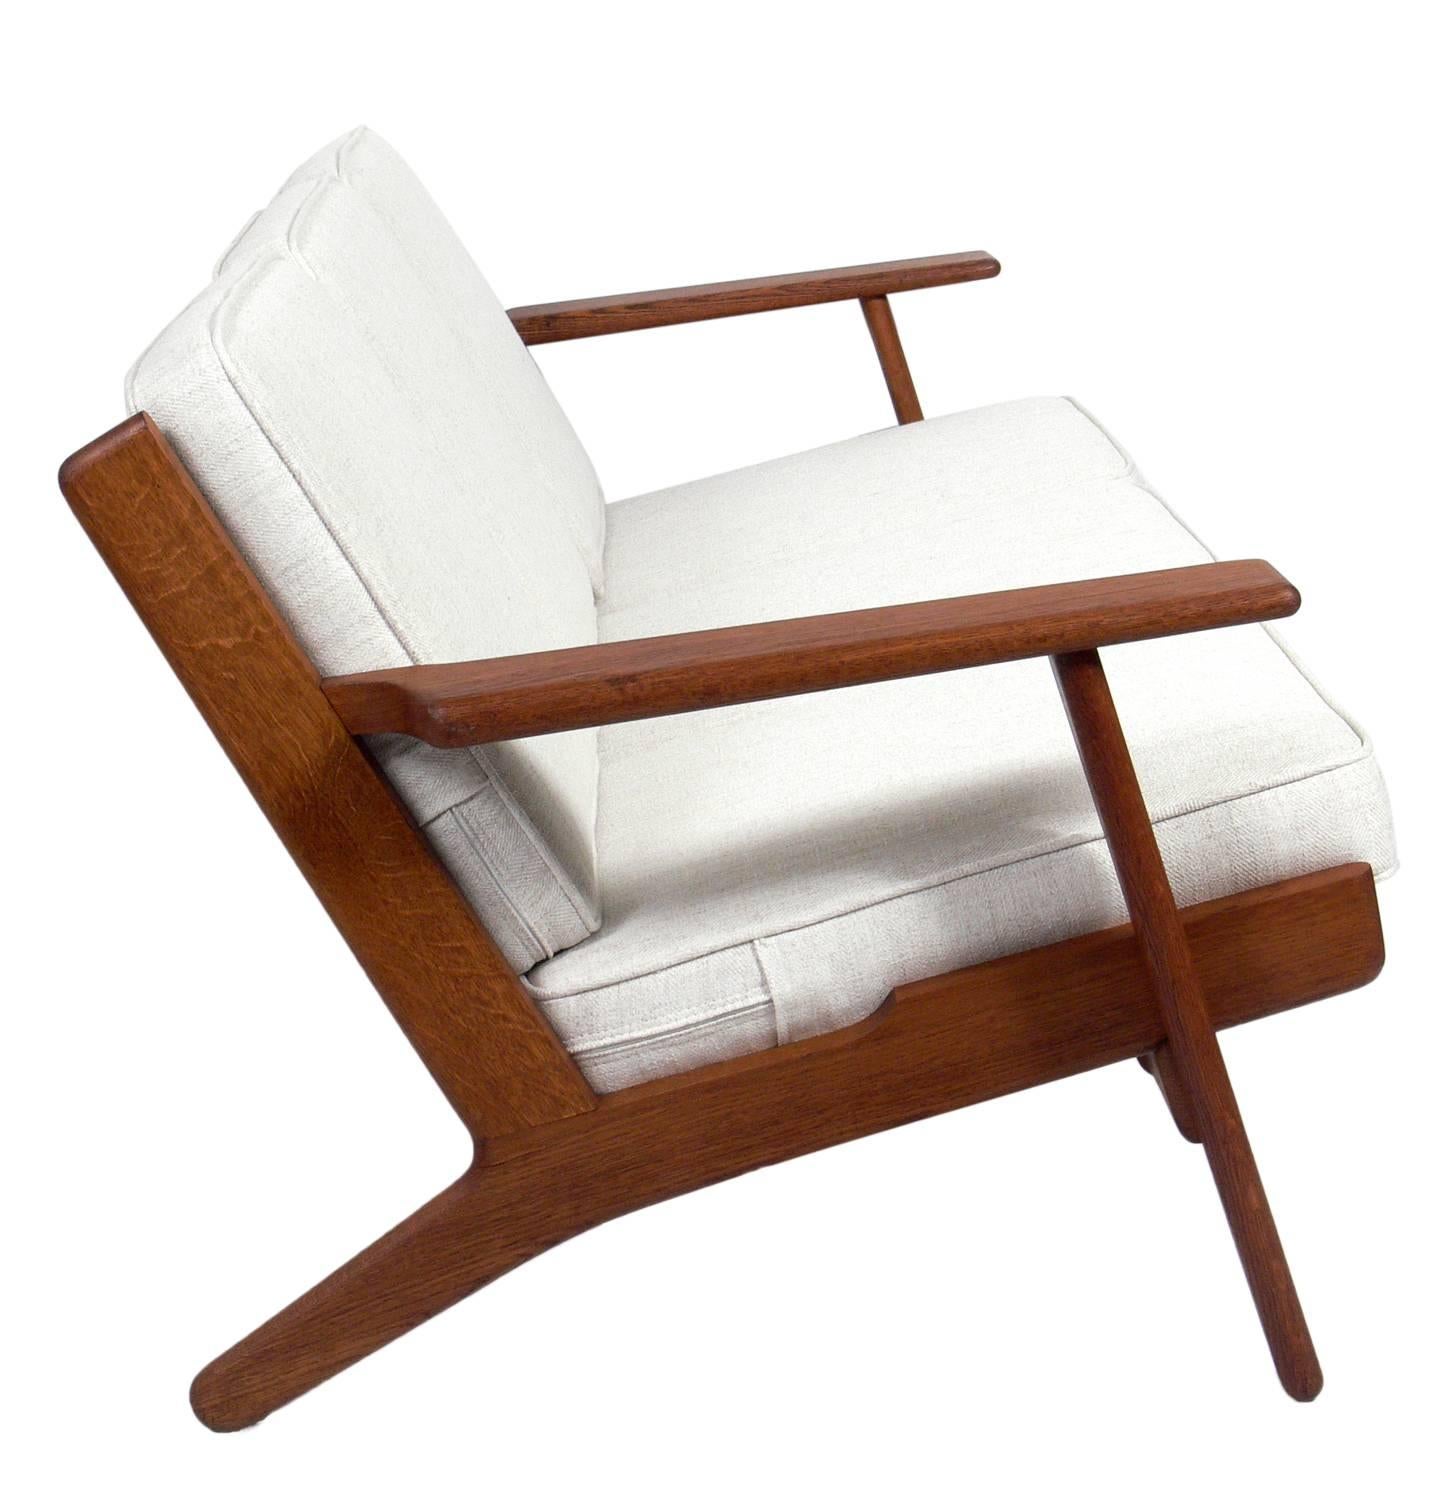 Danish Modern oak sofa, designed by Hans Wegner for GETAMA, Denmark, circa 1960s. The oak frame retains it's warm original patina and the cushions have been reupholstered in an ivory color herringbone upholstery.